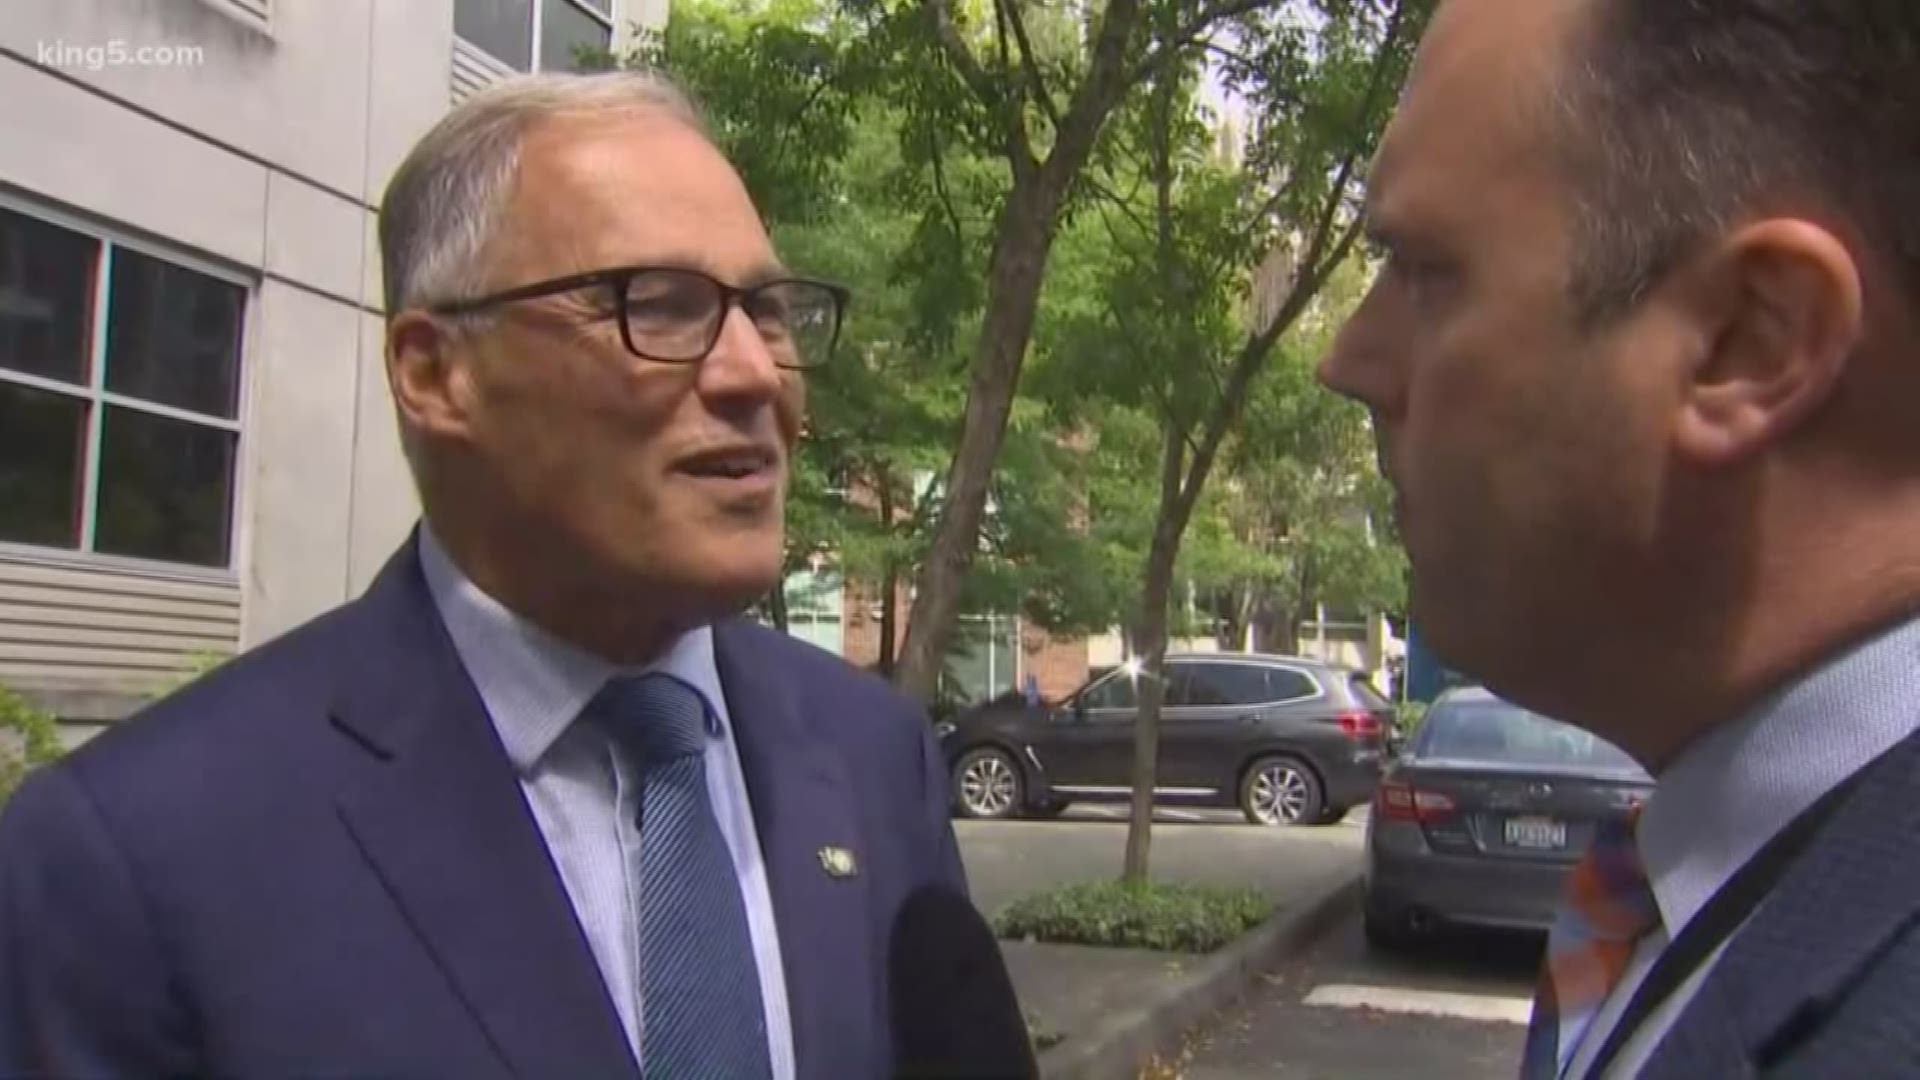 Having dropped out of the 2020 presidential place, Governor Jay Inslee has announced he will seek a third term as governor of Washington.